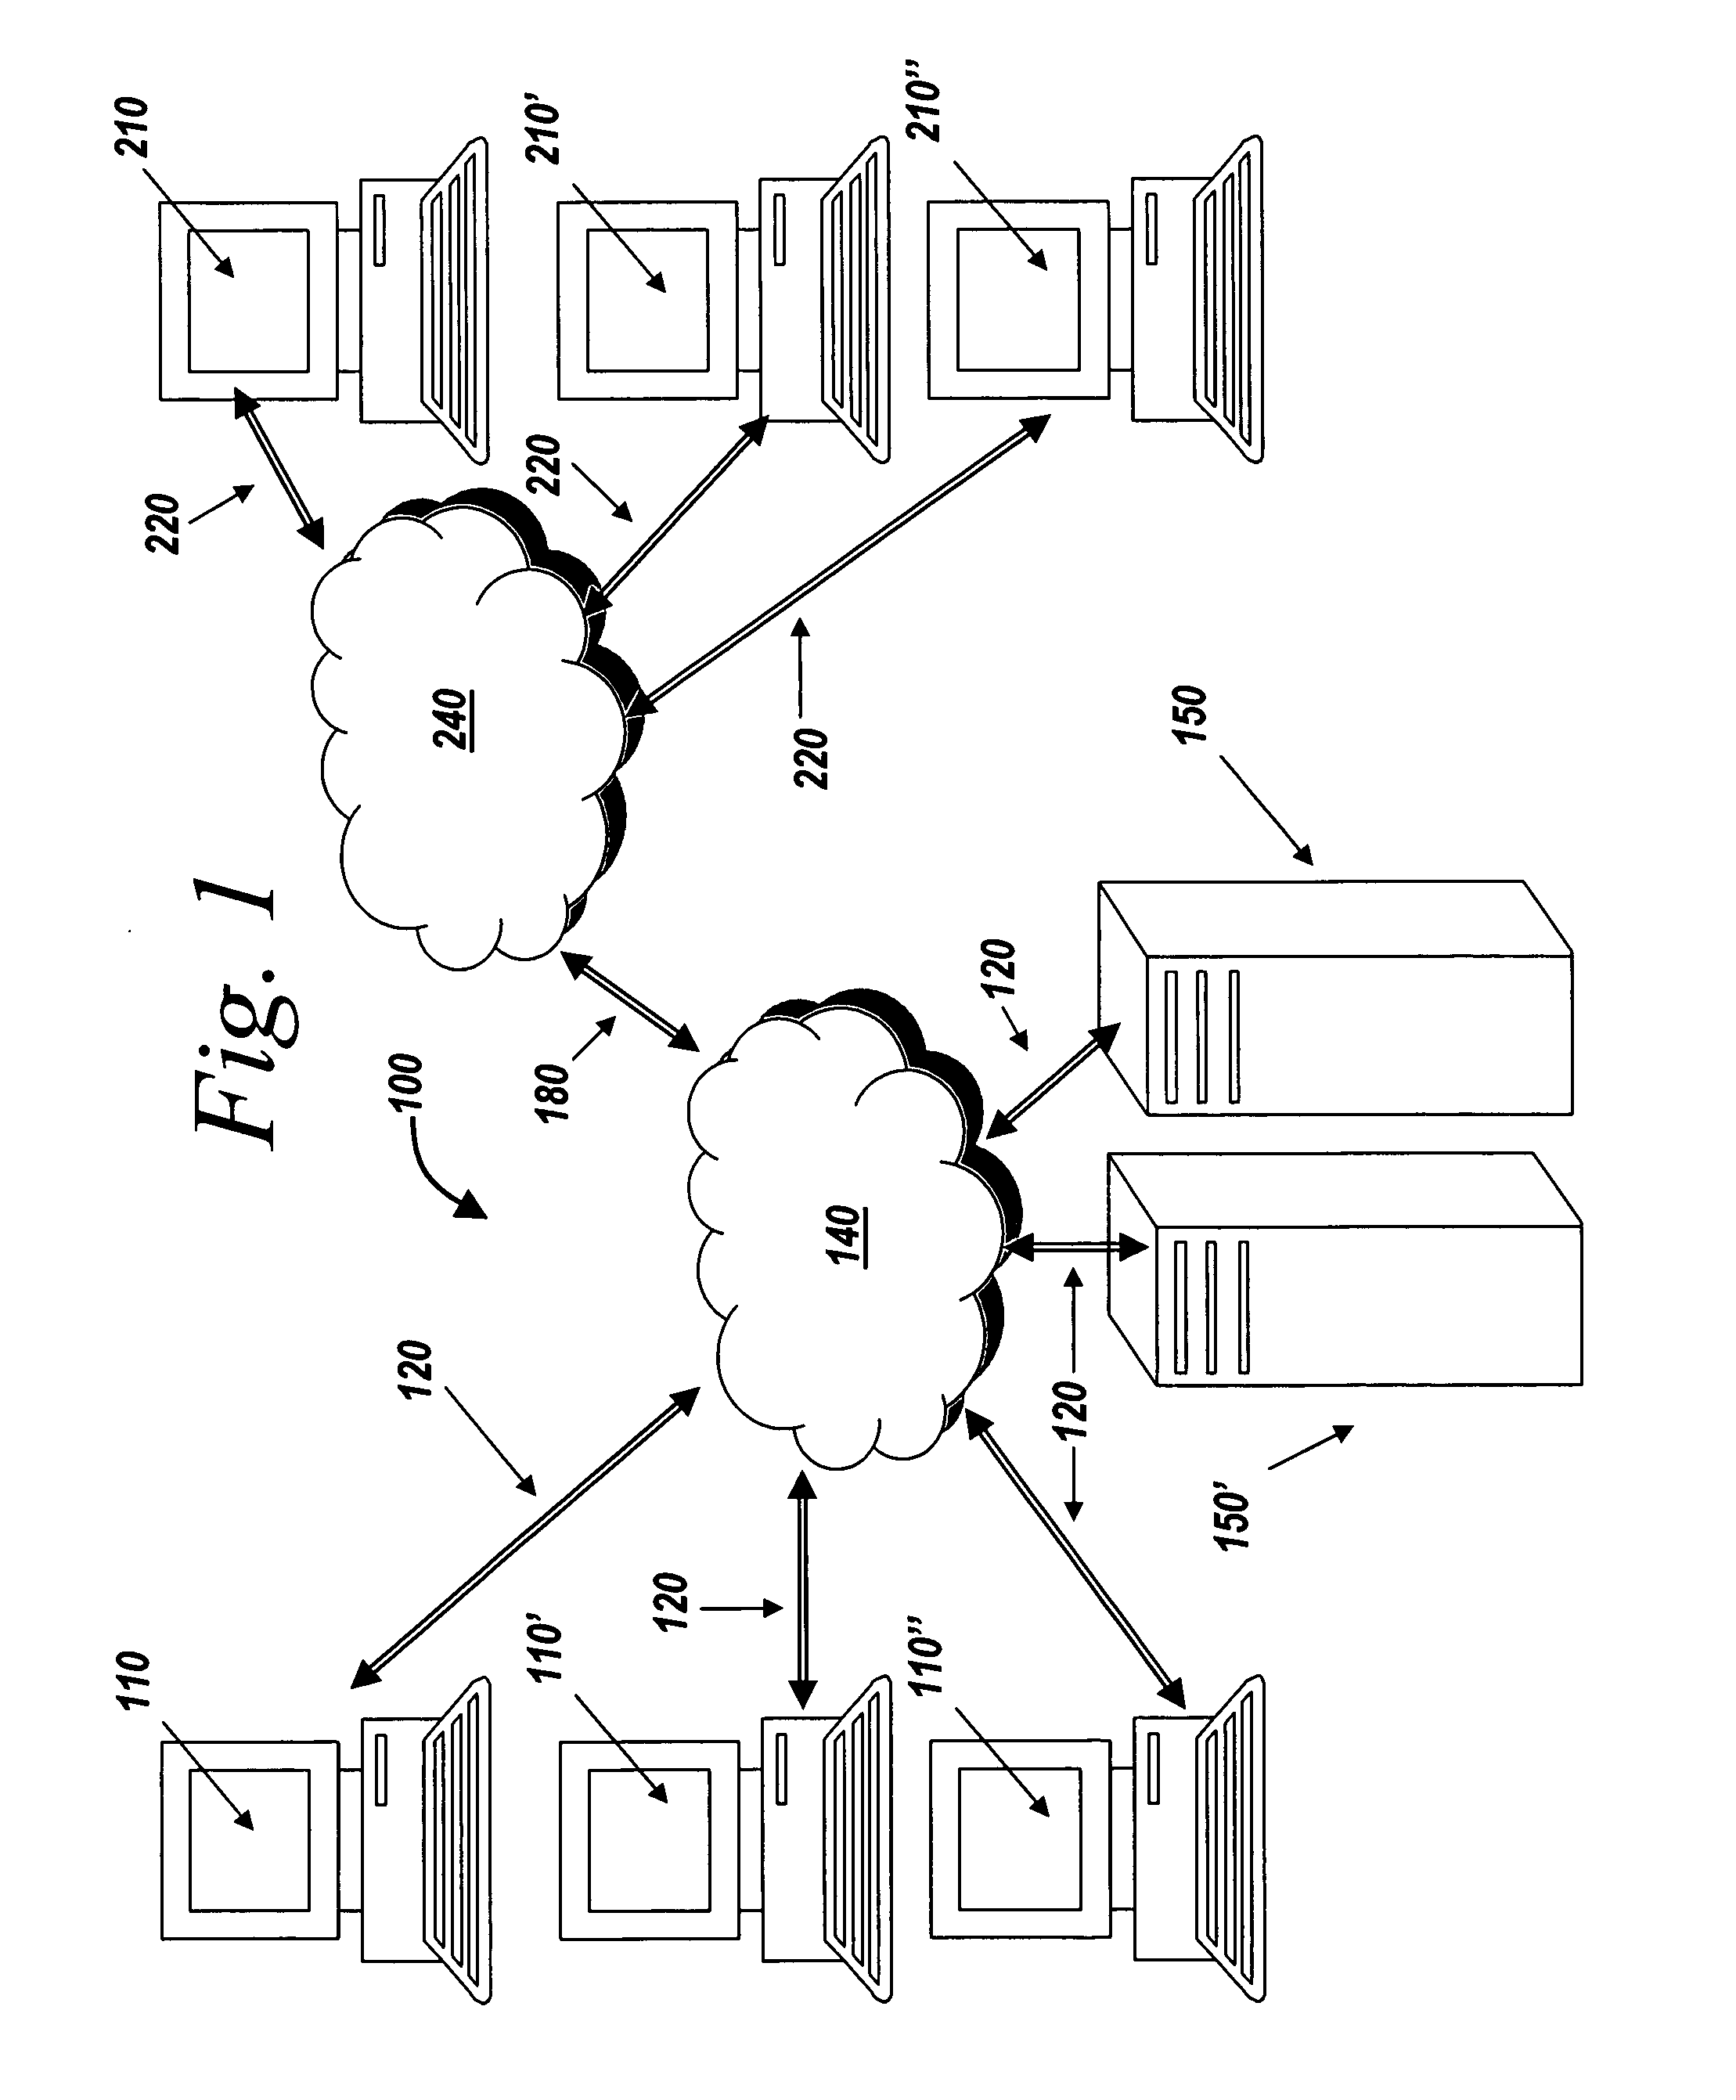 Systems and methods for tracking replication of digital assets